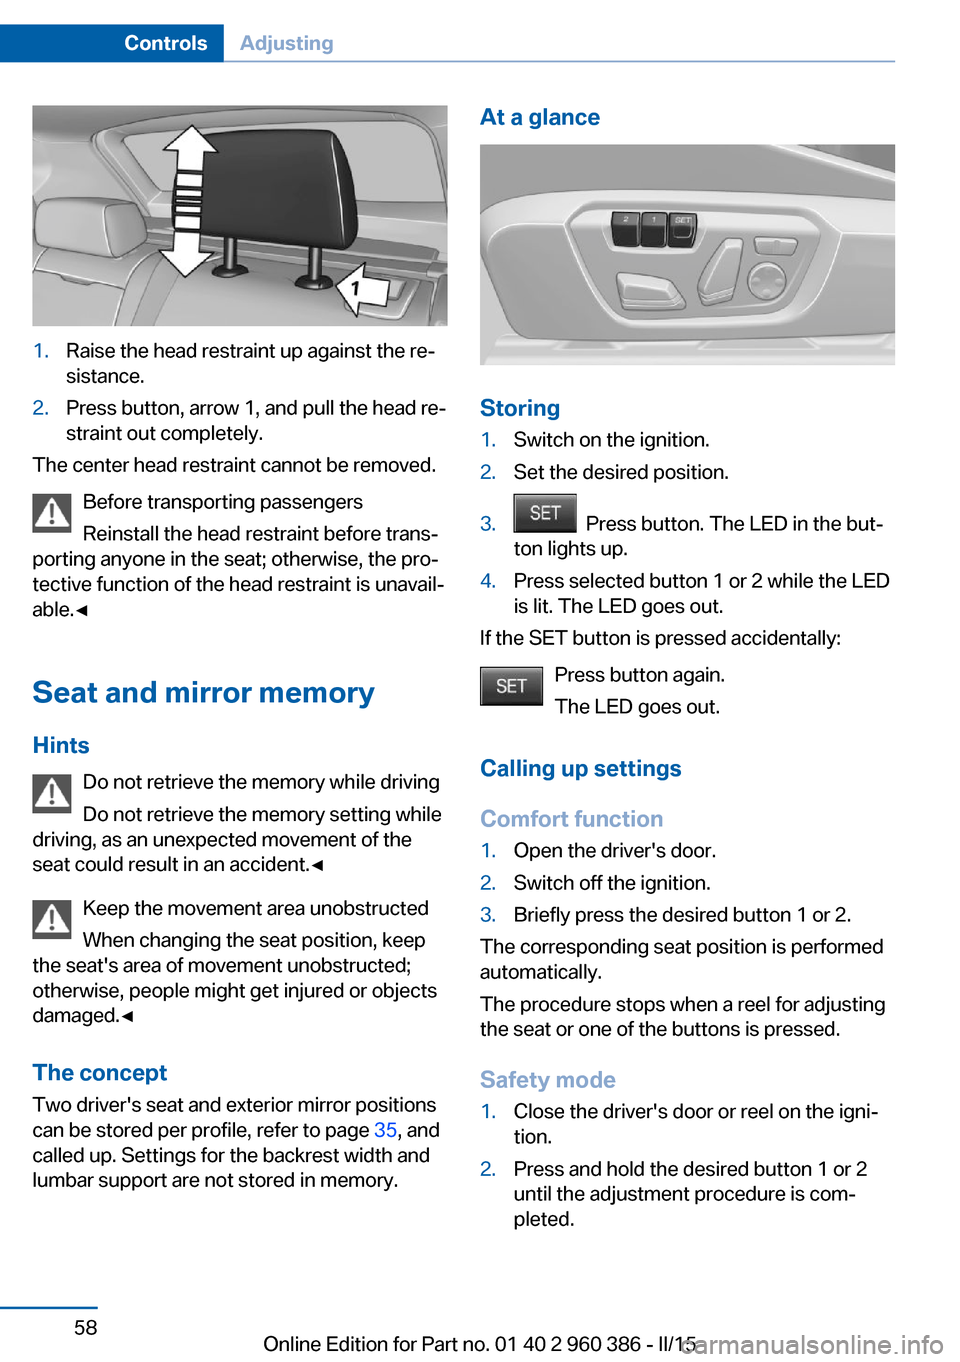 BMW X3 2016 F25 Owners Manual 1.Raise the head restraint up against the re‐
sistance.2.Press button, arrow 1, and pull the head re‐
straint out completely.
The center head restraint cannot be removed.
Before transporting passe